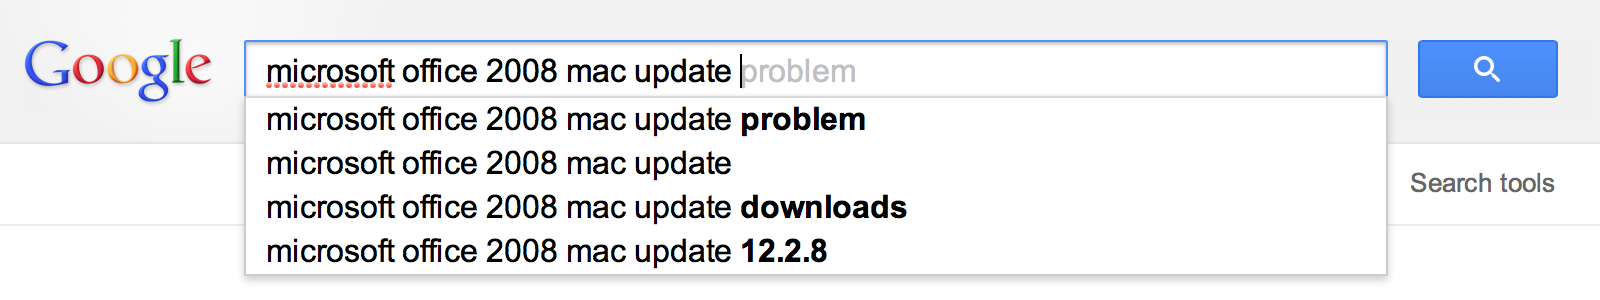 "Google search for Office 2008 Mac Update"